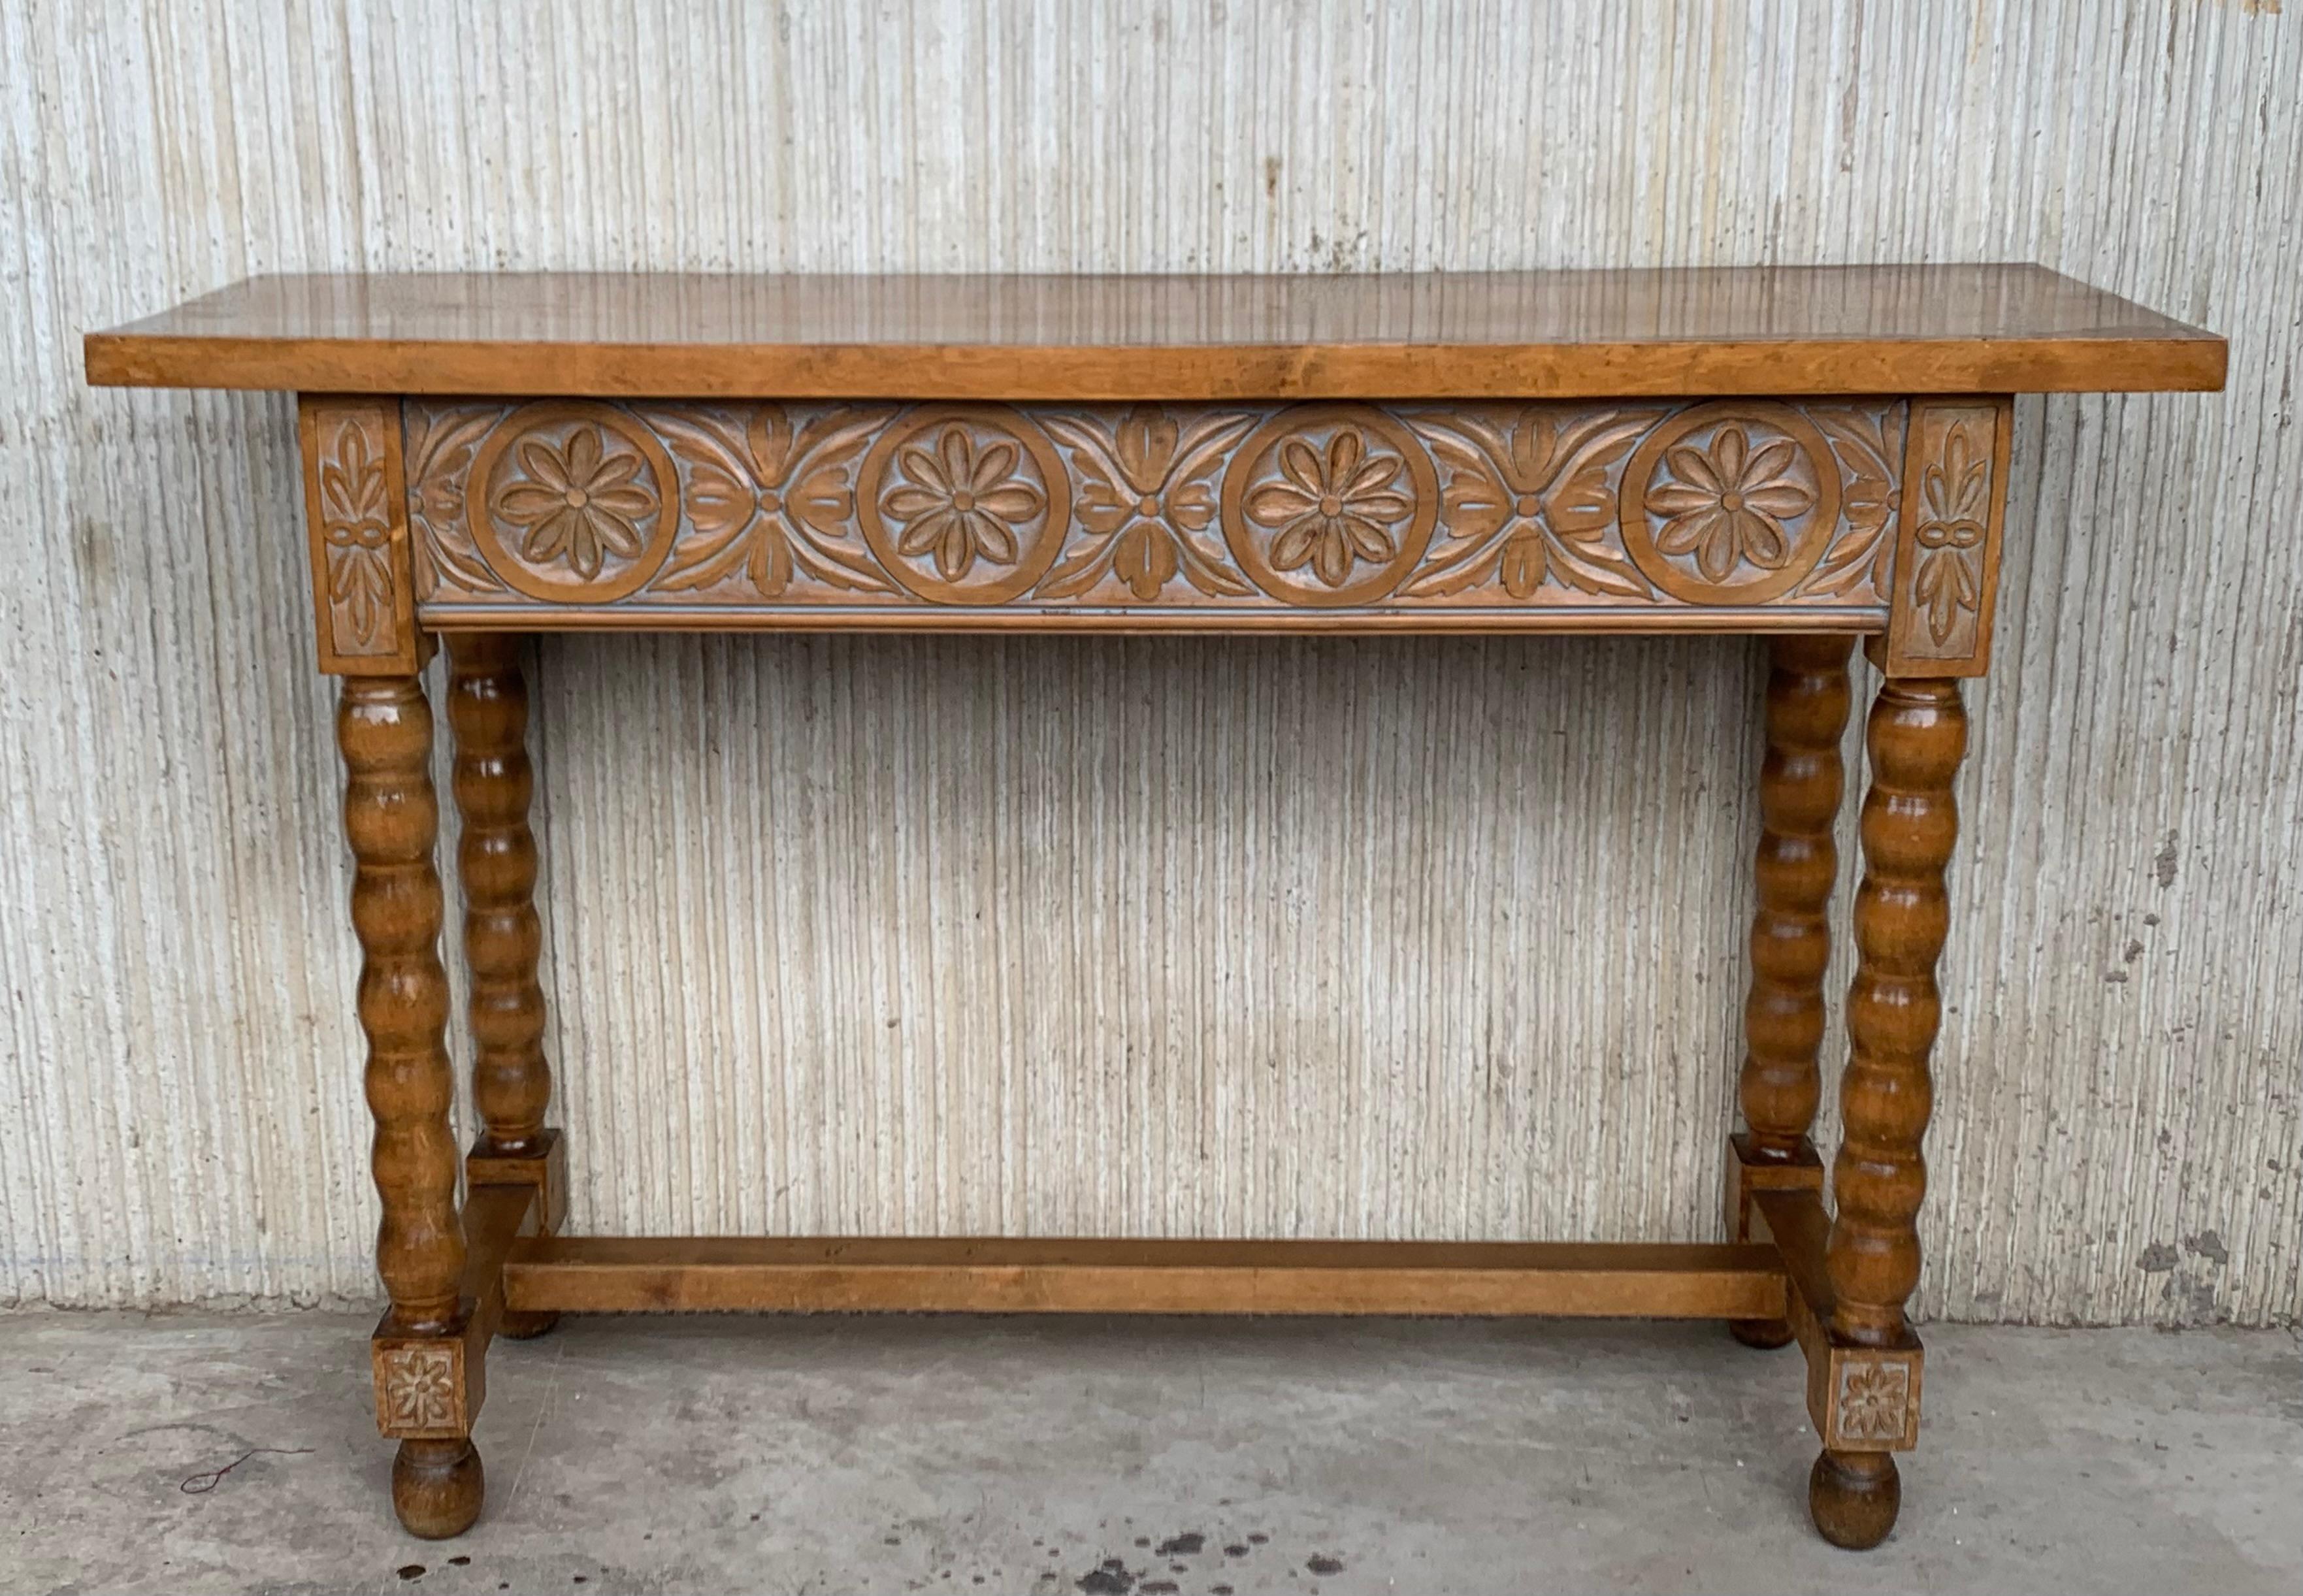 This characterful table is of rare narrow depth of 15in. It is characteristic of Spanish Baroque furniture with a thick single piece top, simple bold chip carved ornament and bold turnings. It has a rich lustrous patina. The thick single plank